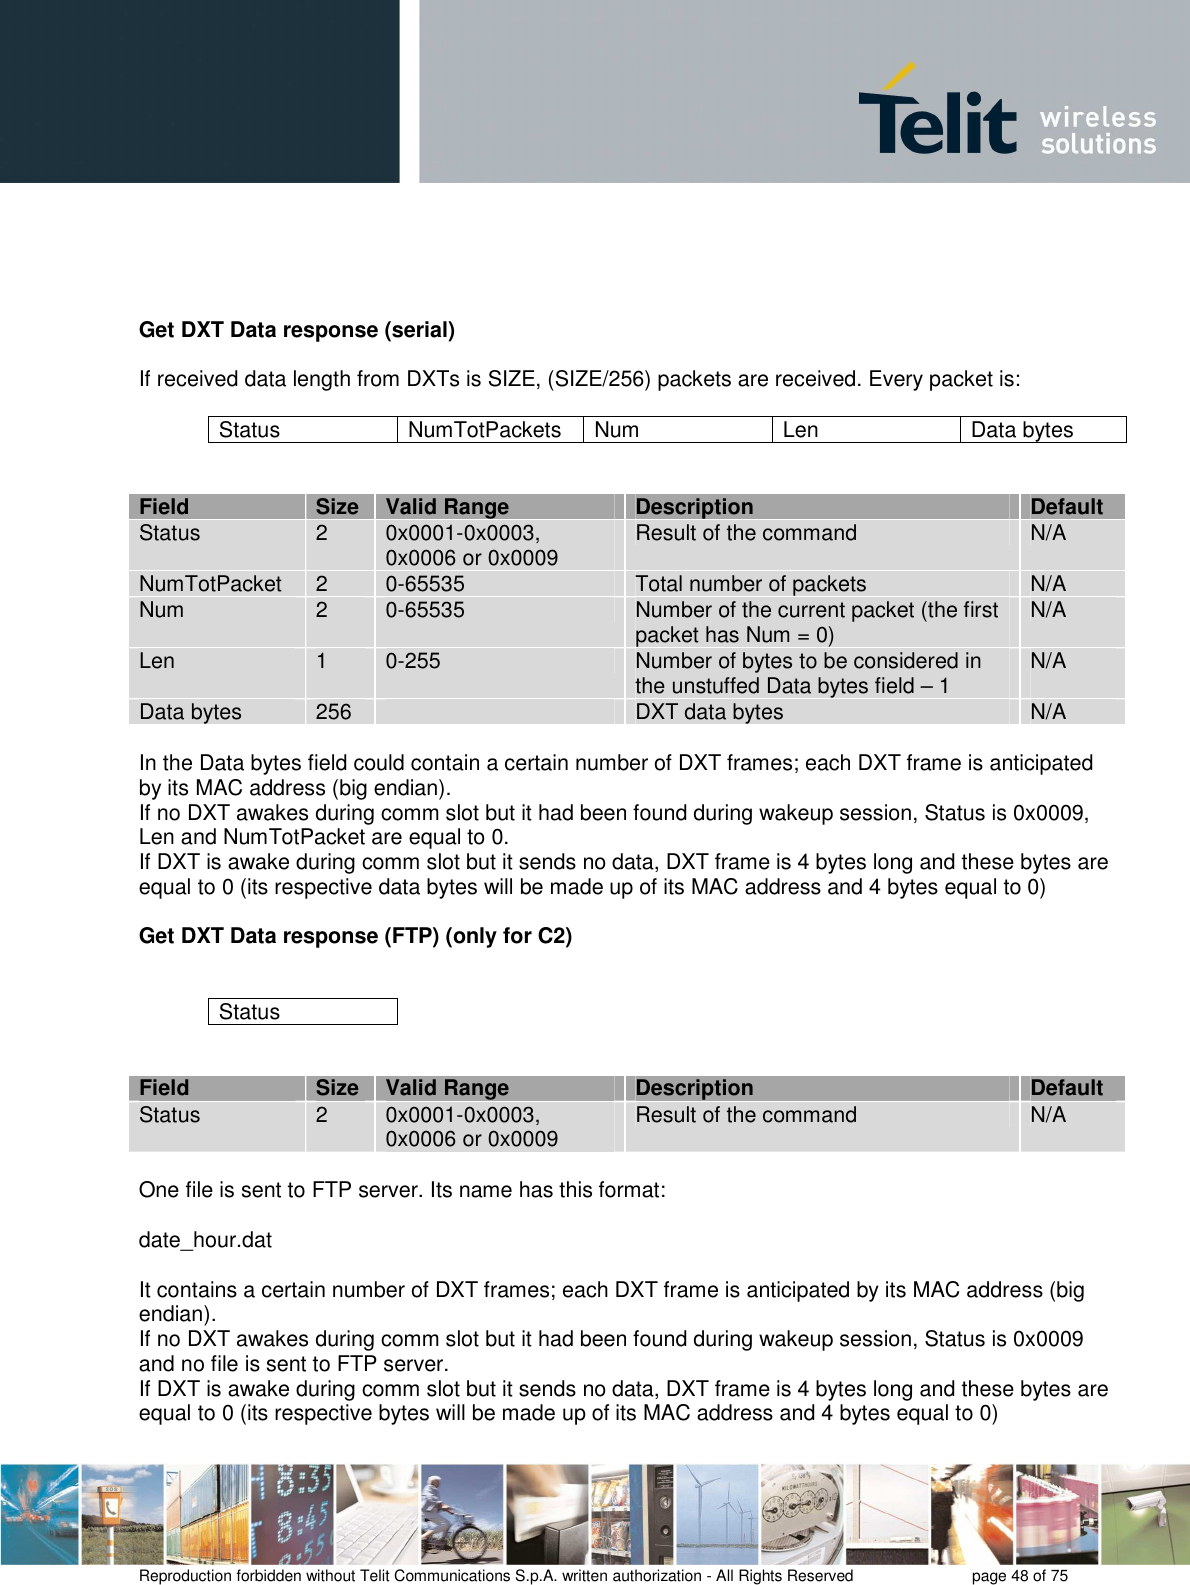       Reproduction forbidden without Telit Communications S.p.A. written authorization - All Rights Reserved    page 48 of 75      Get DXT Data response (serial)  If received data length from DXTs is SIZE, (SIZE/256) packets are received. Every packet is:  Status  NumTotPackets  Num   Len  Data bytes   Field  Size  Valid Range  Description  Default Status  2  0x0001-0x0003, 0x0006 or 0x0009  Result of the command  N/A NumTotPacket  2  0-65535  Total number of packets  N/A Num  2  0-65535  Number of the current packet (the first packet has Num = 0)  N/A Len  1  0-255  Number of bytes to be considered in the unstuffed Data bytes field – 1   N/A  Data bytes  256    DXT data bytes  N/A  In the Data bytes field could contain a certain number of DXT frames; each DXT frame is anticipated by its MAC address (big endian).  If no DXT awakes during comm slot but it had been found during wakeup session, Status is 0x0009, Len and NumTotPacket are equal to 0. If DXT is awake during comm slot but it sends no data, DXT frame is 4 bytes long and these bytes are equal to 0 (its respective data bytes will be made up of its MAC address and 4 bytes equal to 0)  Get DXT Data response (FTP) (only for C2)   Status   Field  Size  Valid Range  Description  Default Status  2  0x0001-0x0003, 0x0006 or 0x0009  Result of the command  N/A  One file is sent to FTP server. Its name has this format:  date_hour.dat  It contains a certain number of DXT frames; each DXT frame is anticipated by its MAC address (big endian).  If no DXT awakes during comm slot but it had been found during wakeup session, Status is 0x0009 and no file is sent to FTP server. If DXT is awake during comm slot but it sends no data, DXT frame is 4 bytes long and these bytes are equal to 0 (its respective bytes will be made up of its MAC address and 4 bytes equal to 0)  